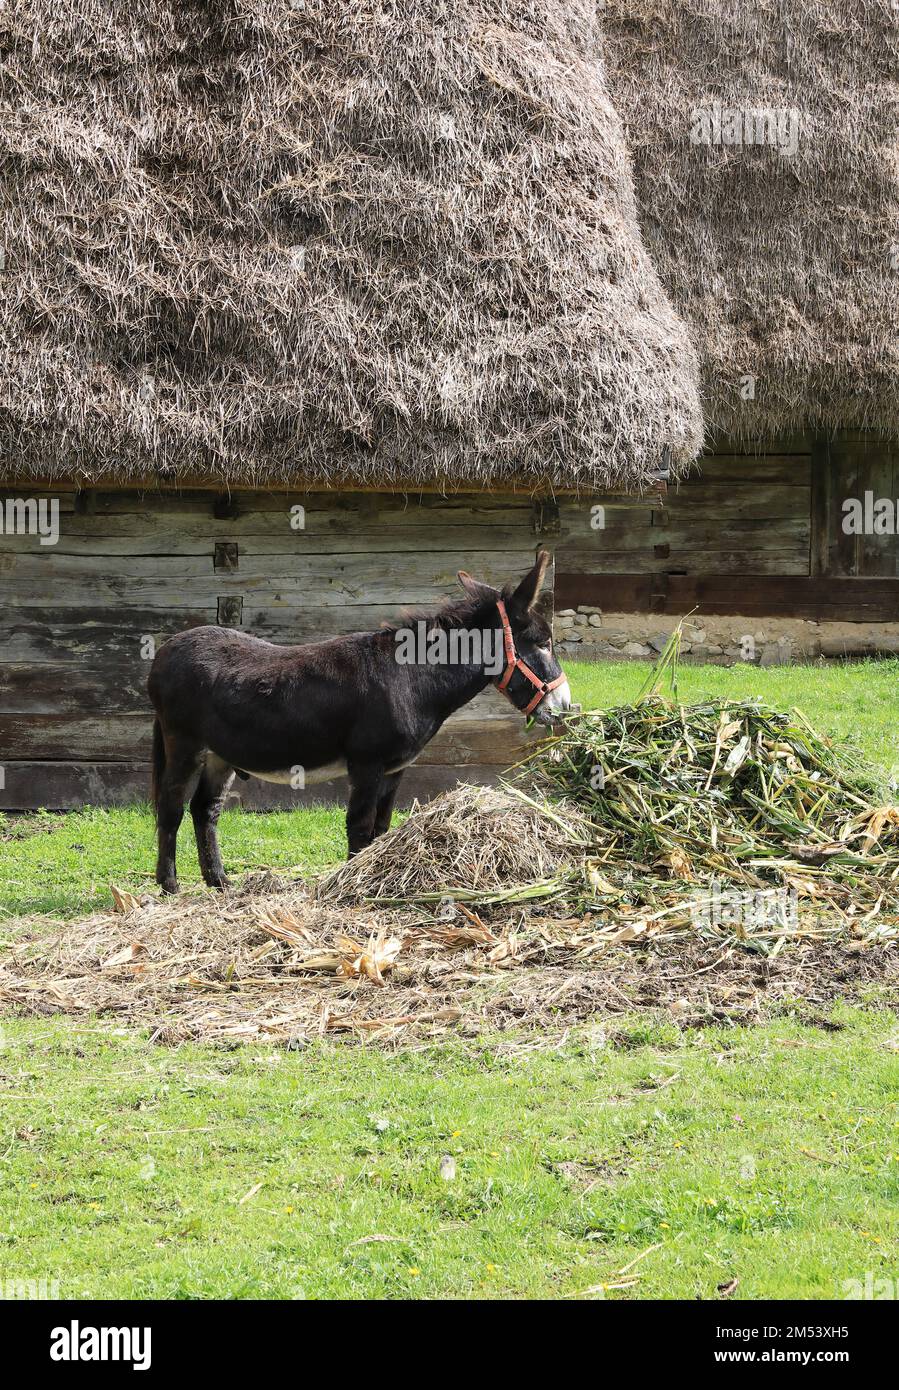 Farm animals on a homestead in Astra open-air ethnographic museum in Sibiu, Transylvania, Romania, showing traditional folkloric folk-architecture. Stock Photo